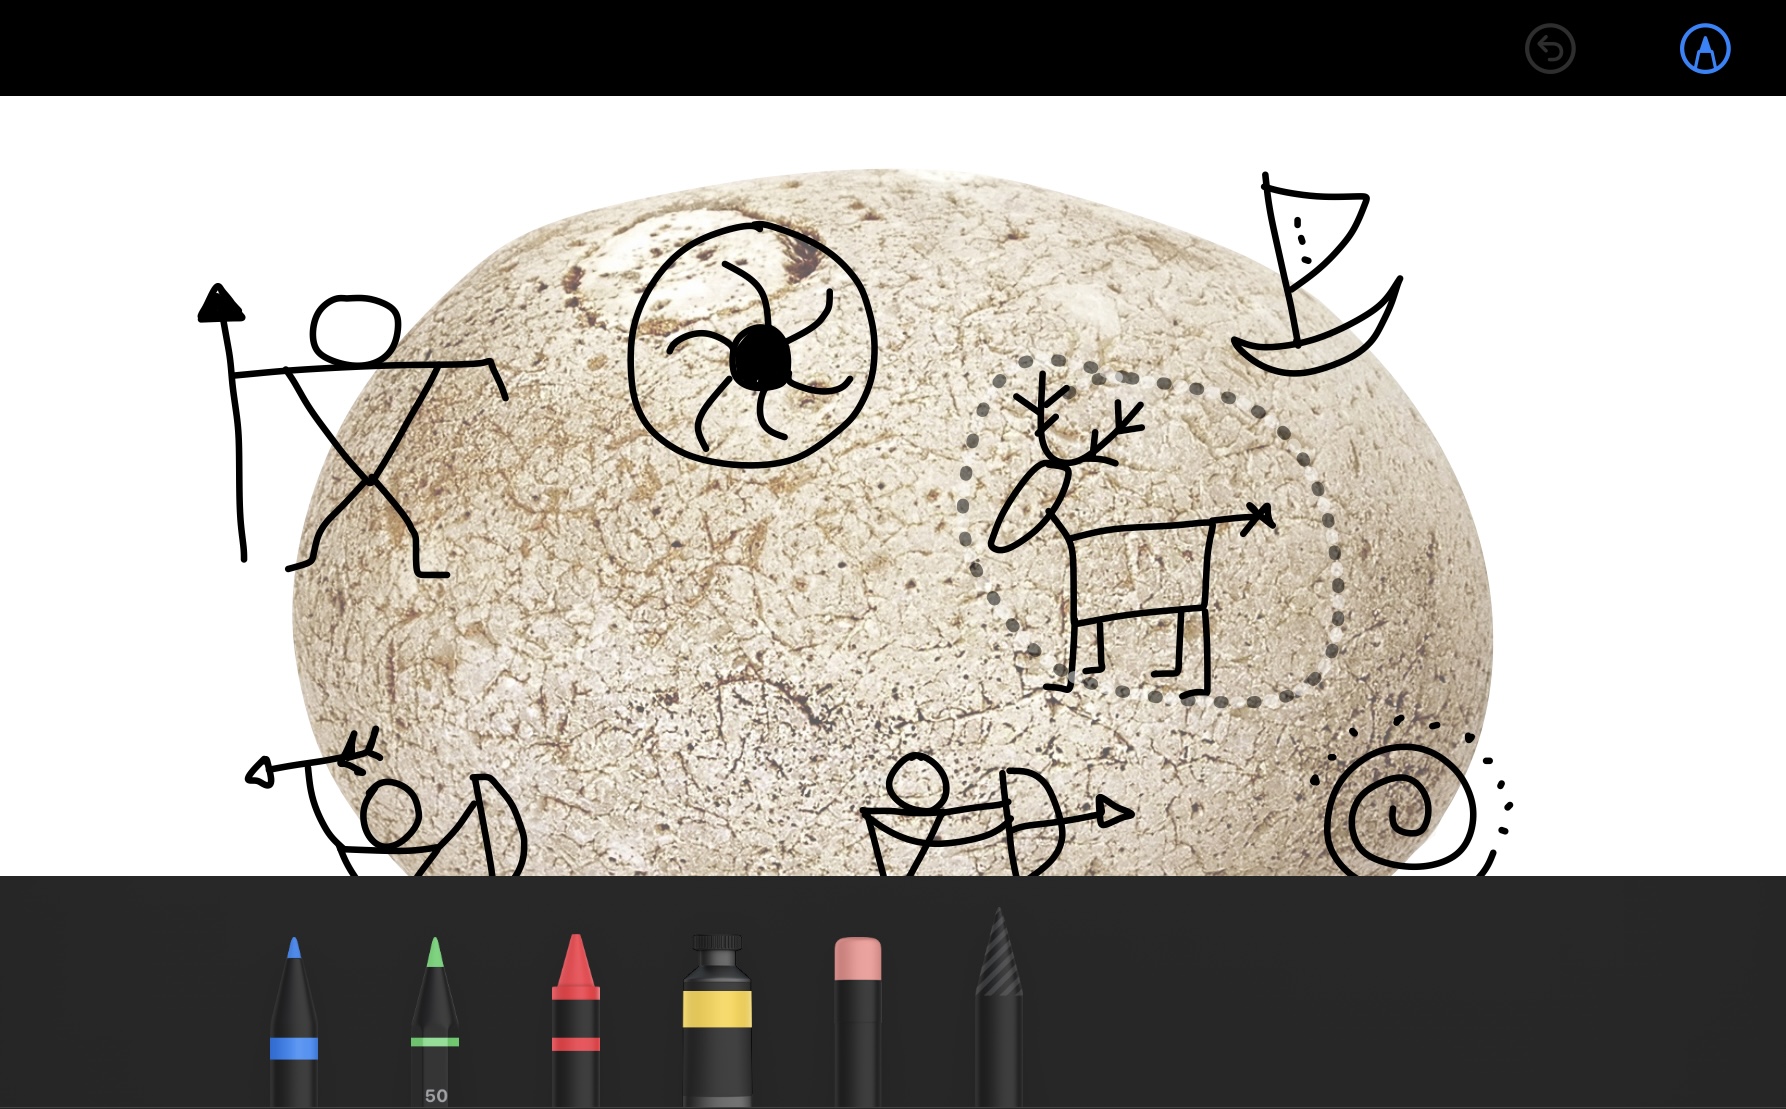 The selection tool highlights one of the doodles. 